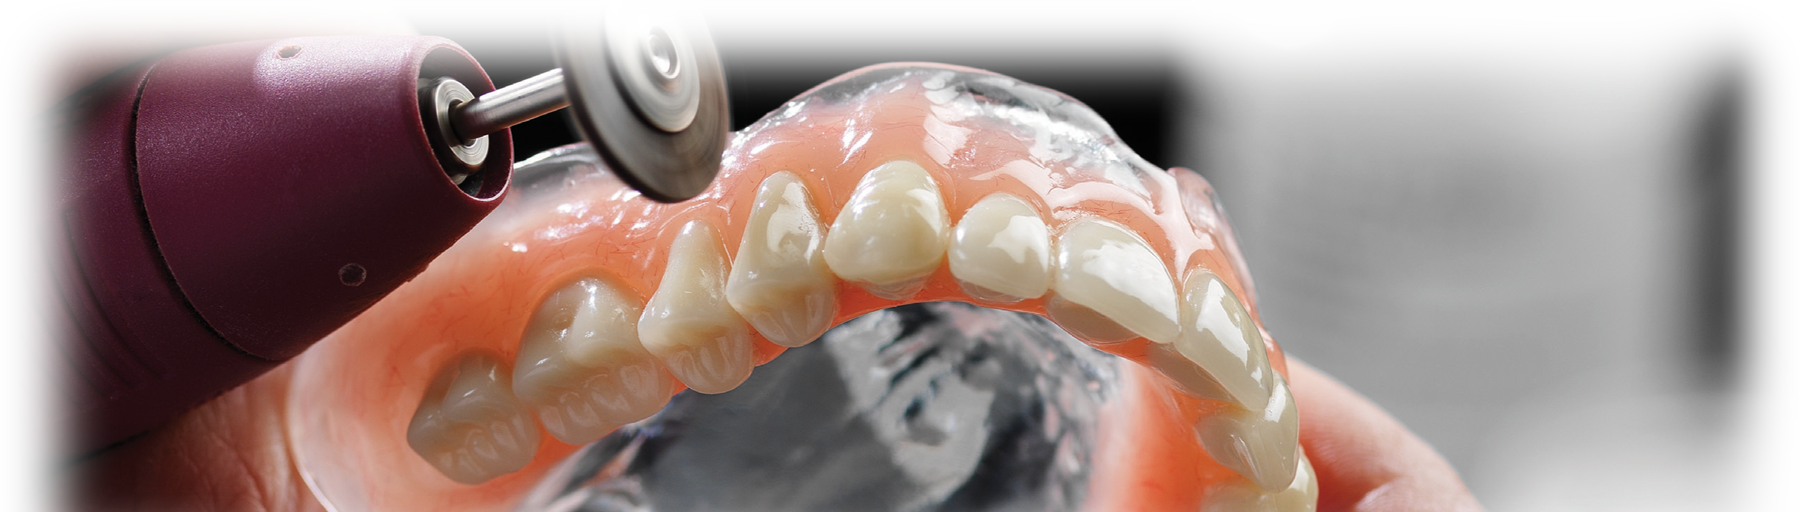 Denture Opaque / Stains